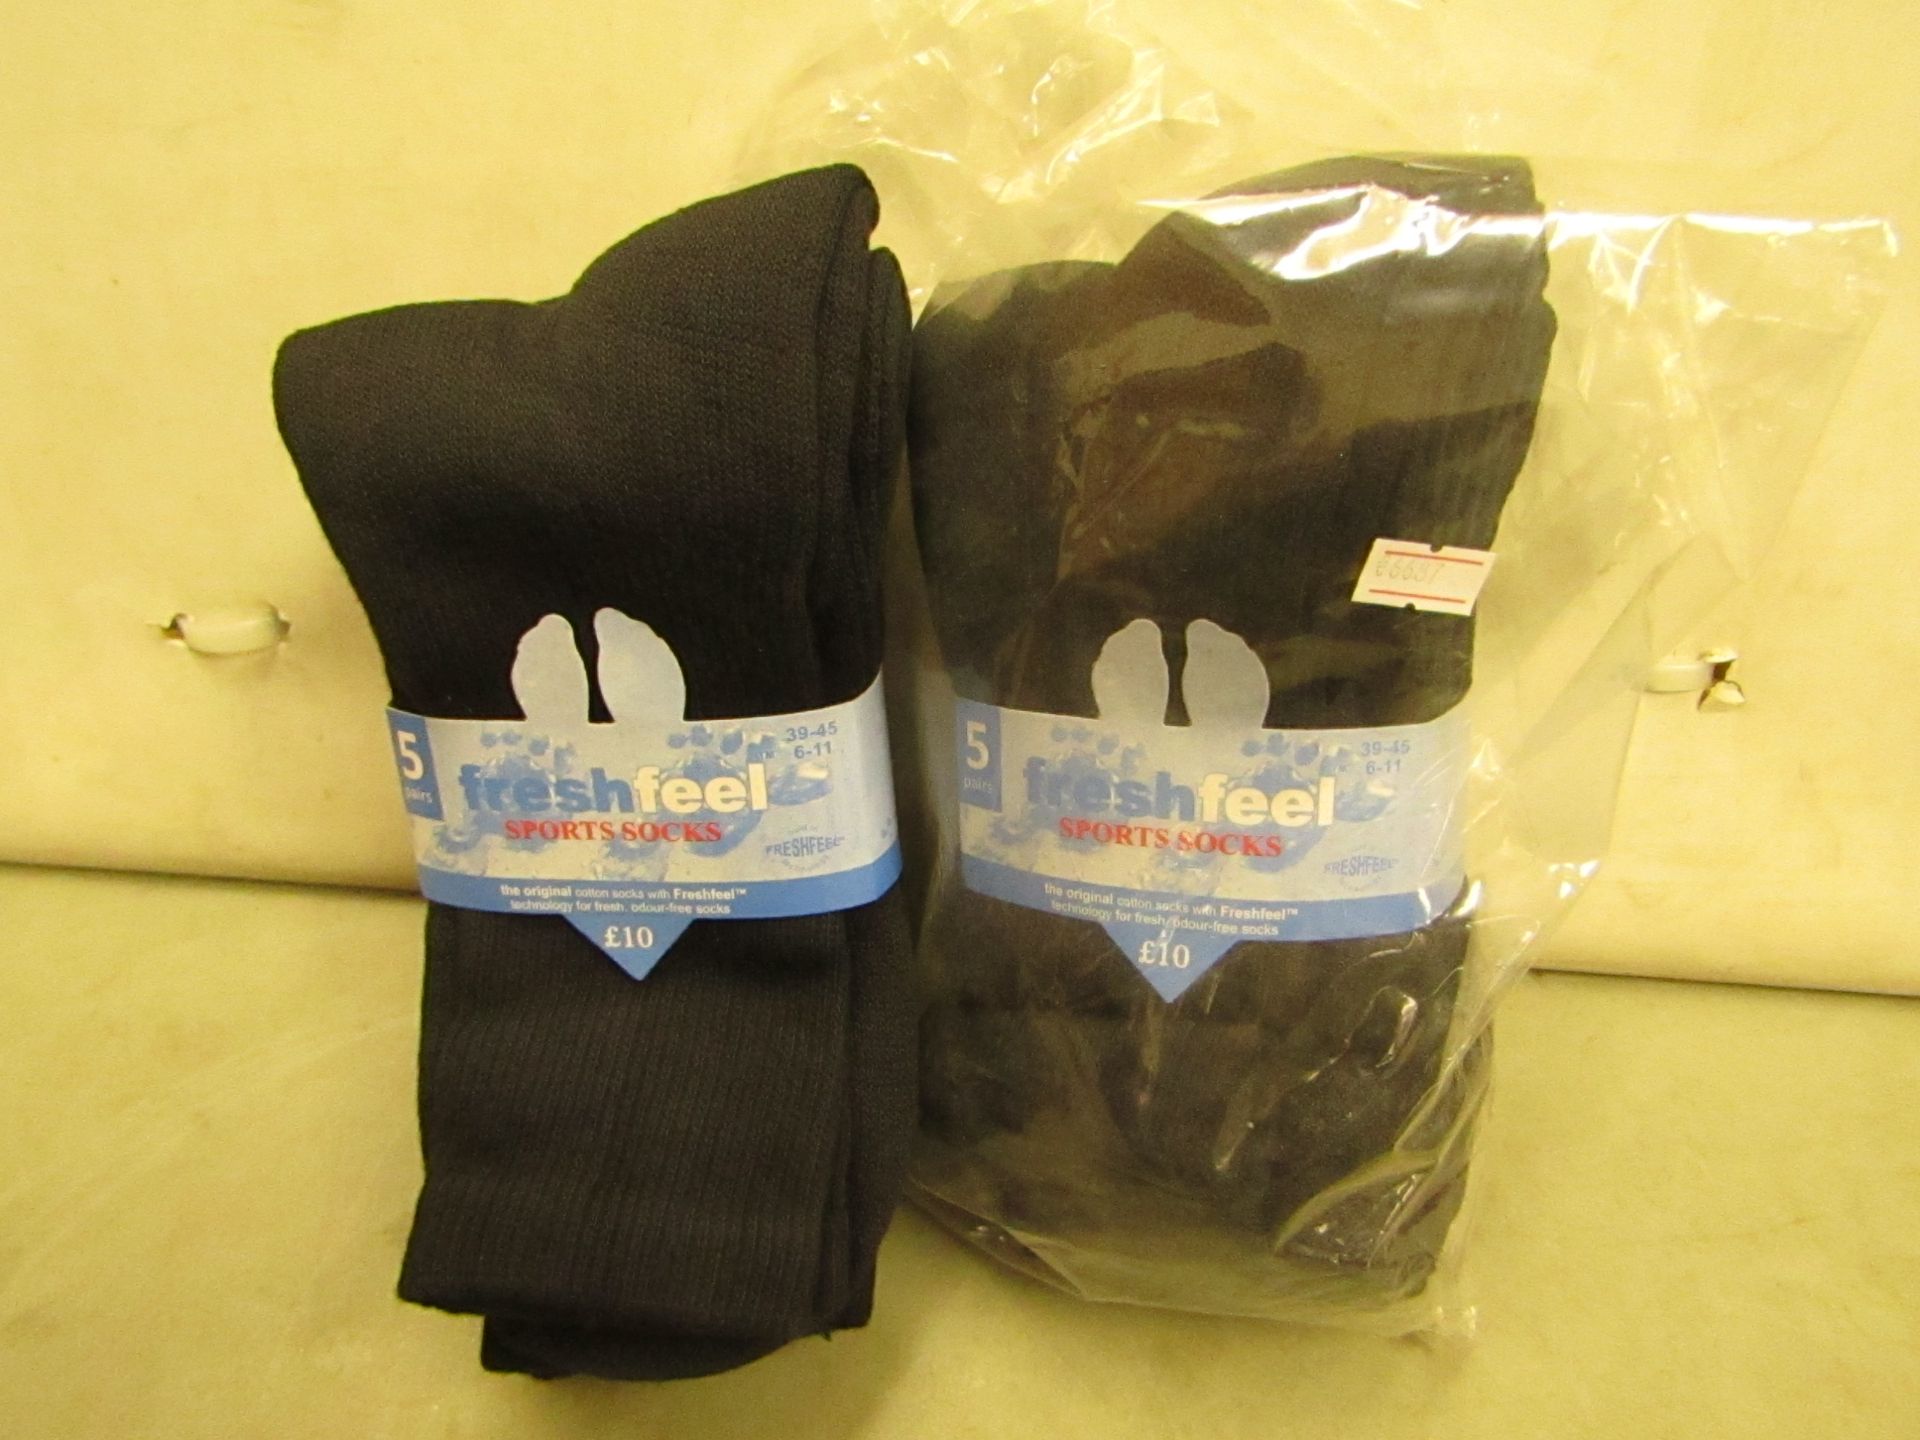 10 X Pairs of Mens Sport Socks Size 6-11 New & Packaged